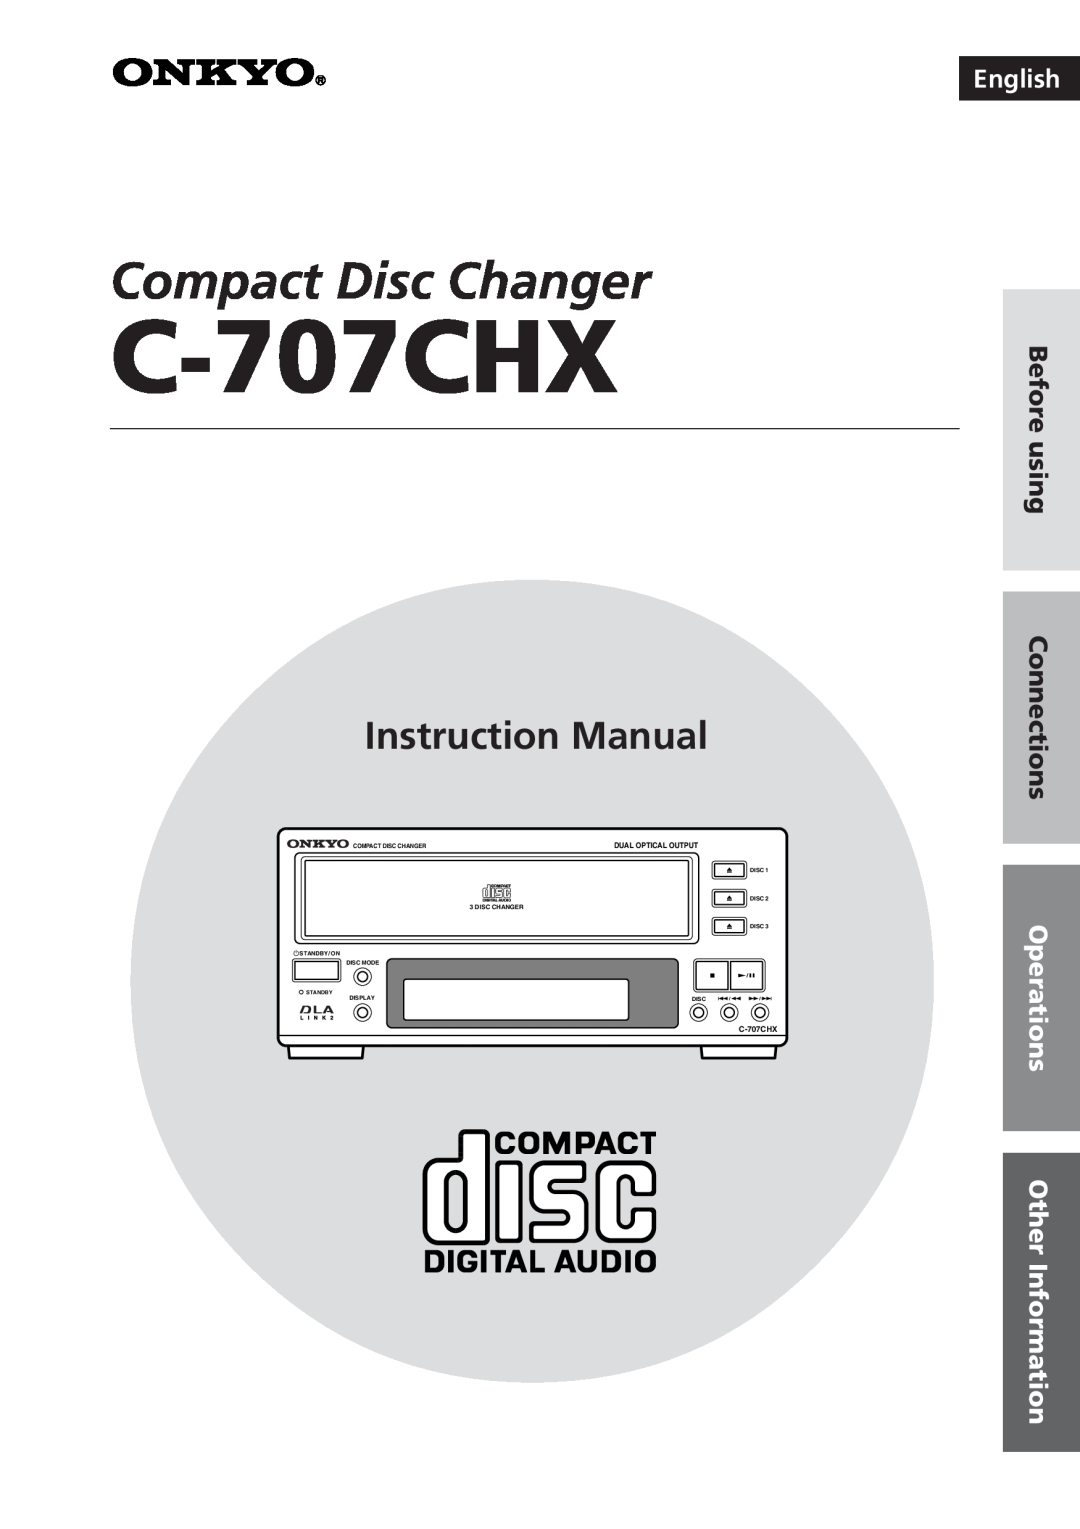 Onkyo C-707CHX instruction manual English, Before using Connections, Operations Other Information, Compact Disc Changer 